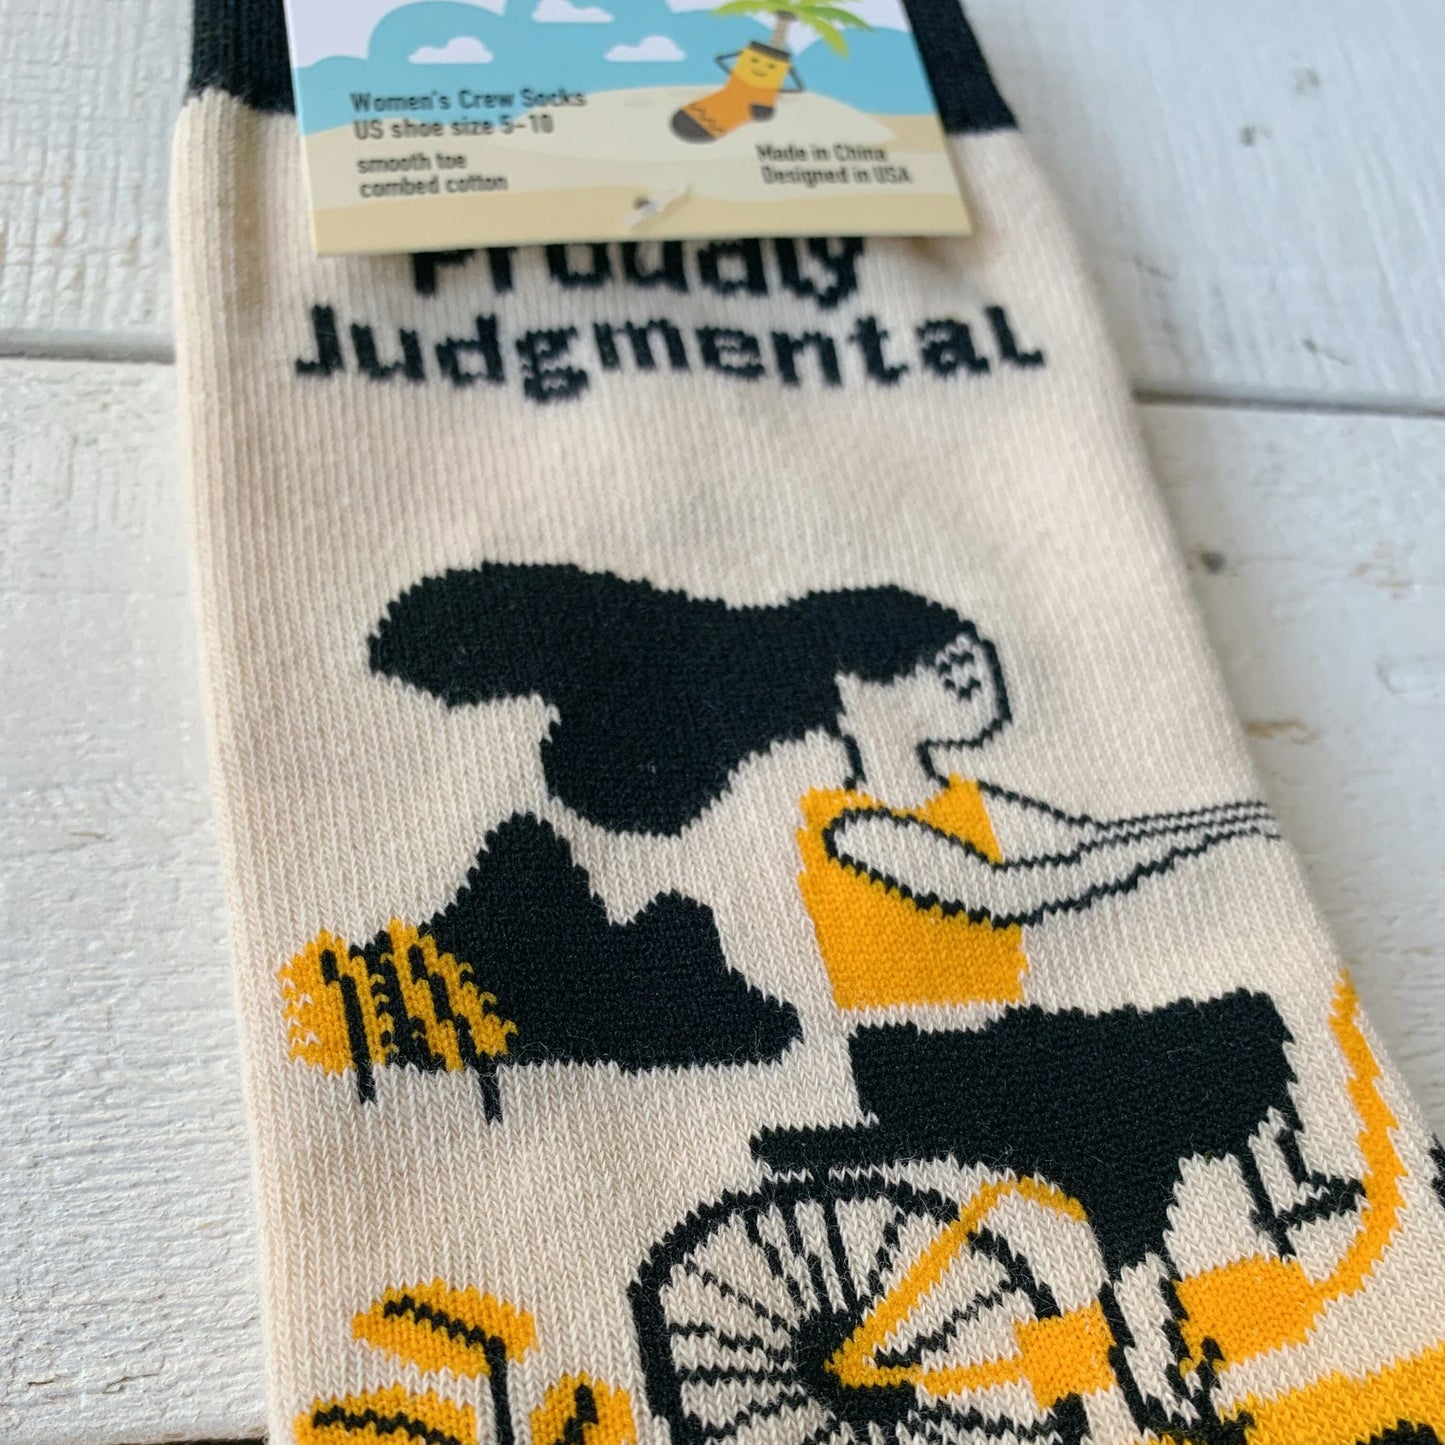 Proudly Judgmental Women's Crew Socks | Girl on a Bicycle